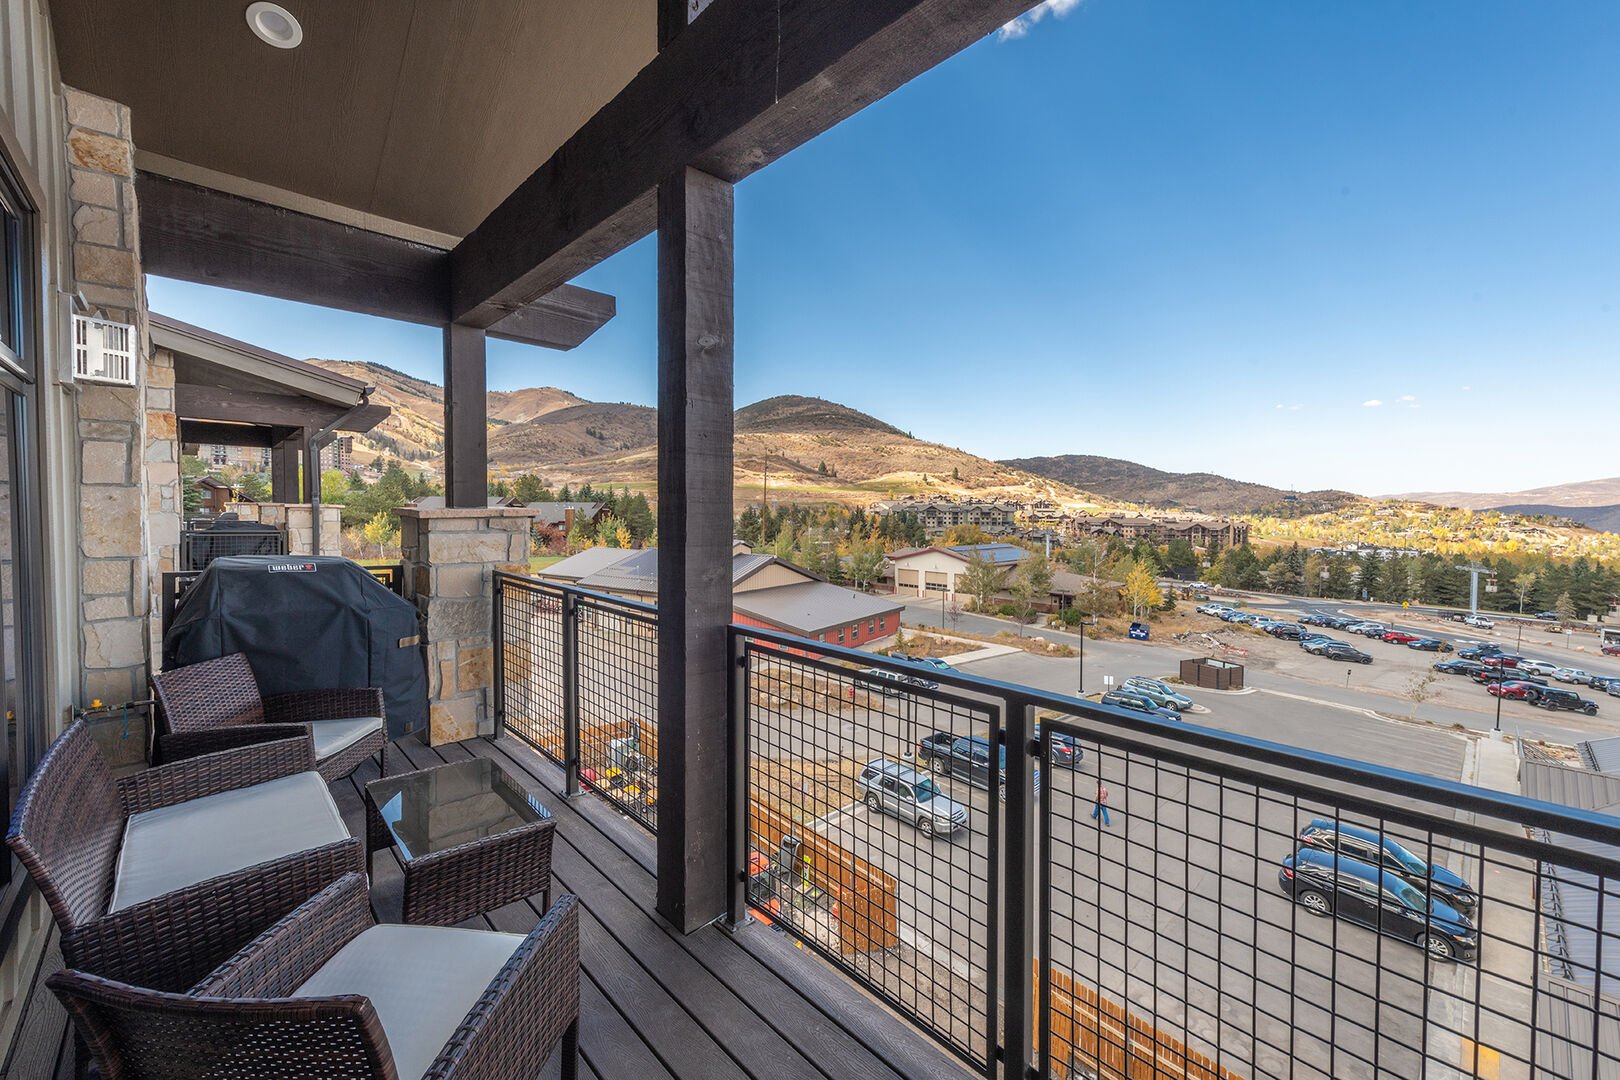 Balcony with gas grill and  views of the hills and lift